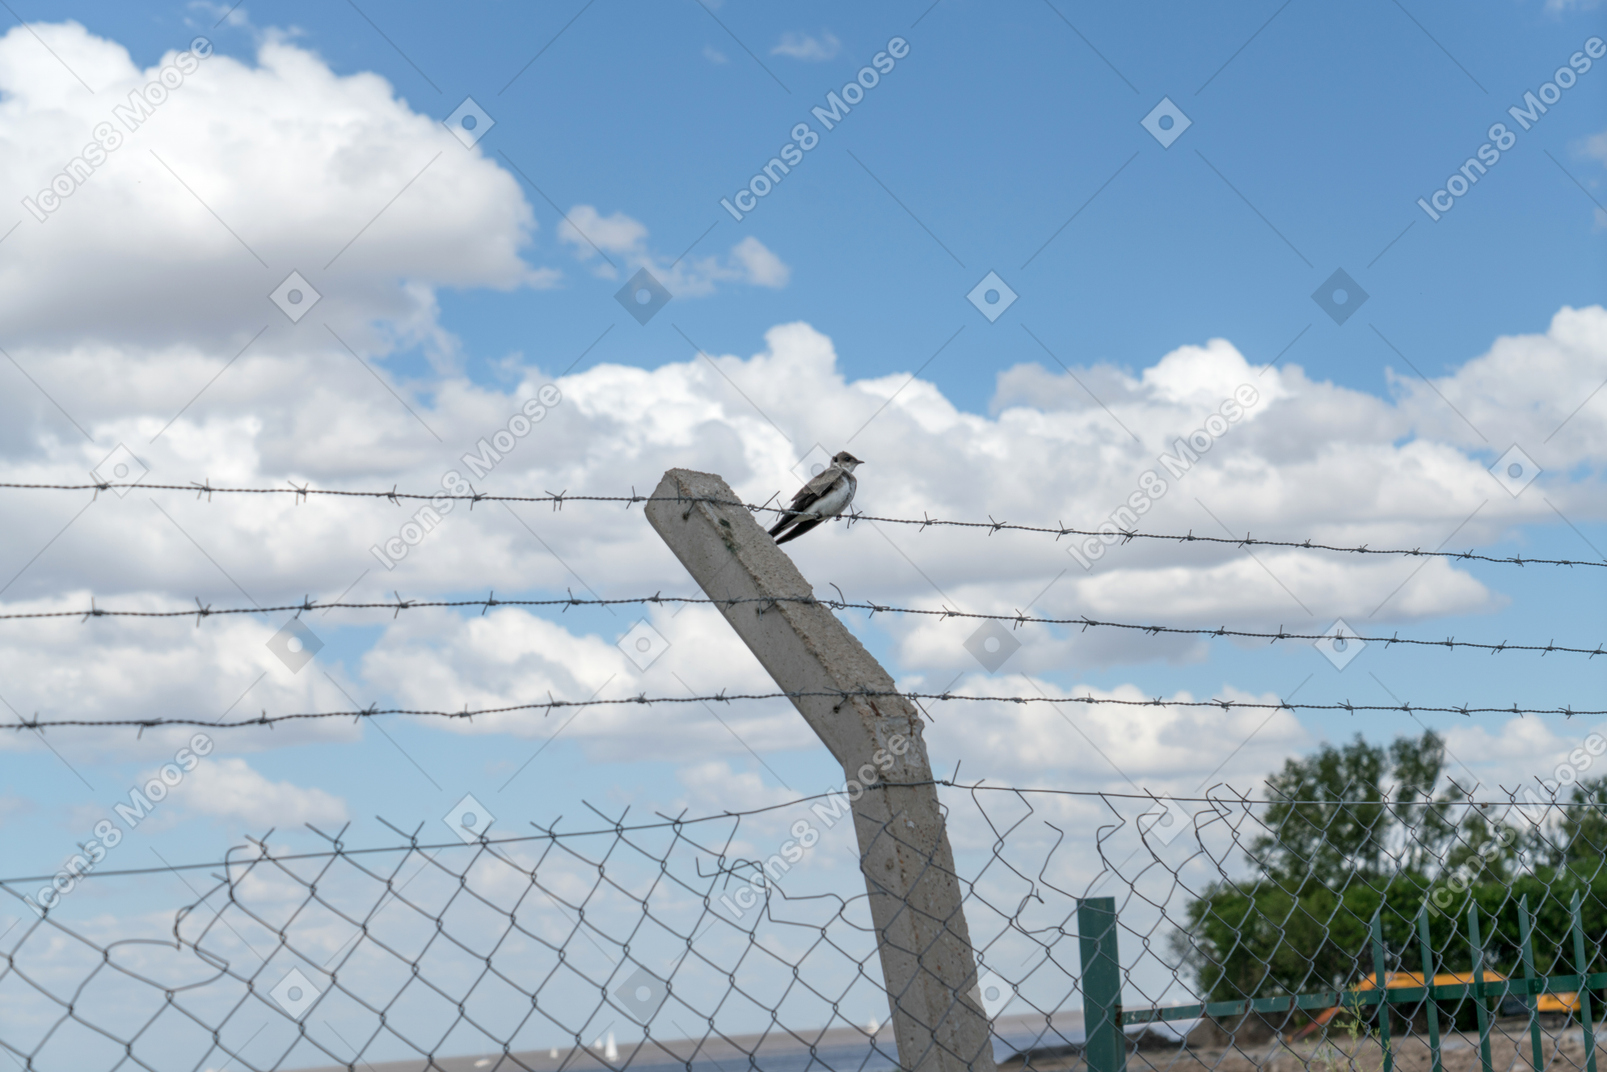 Bird sitting on the prickly fence